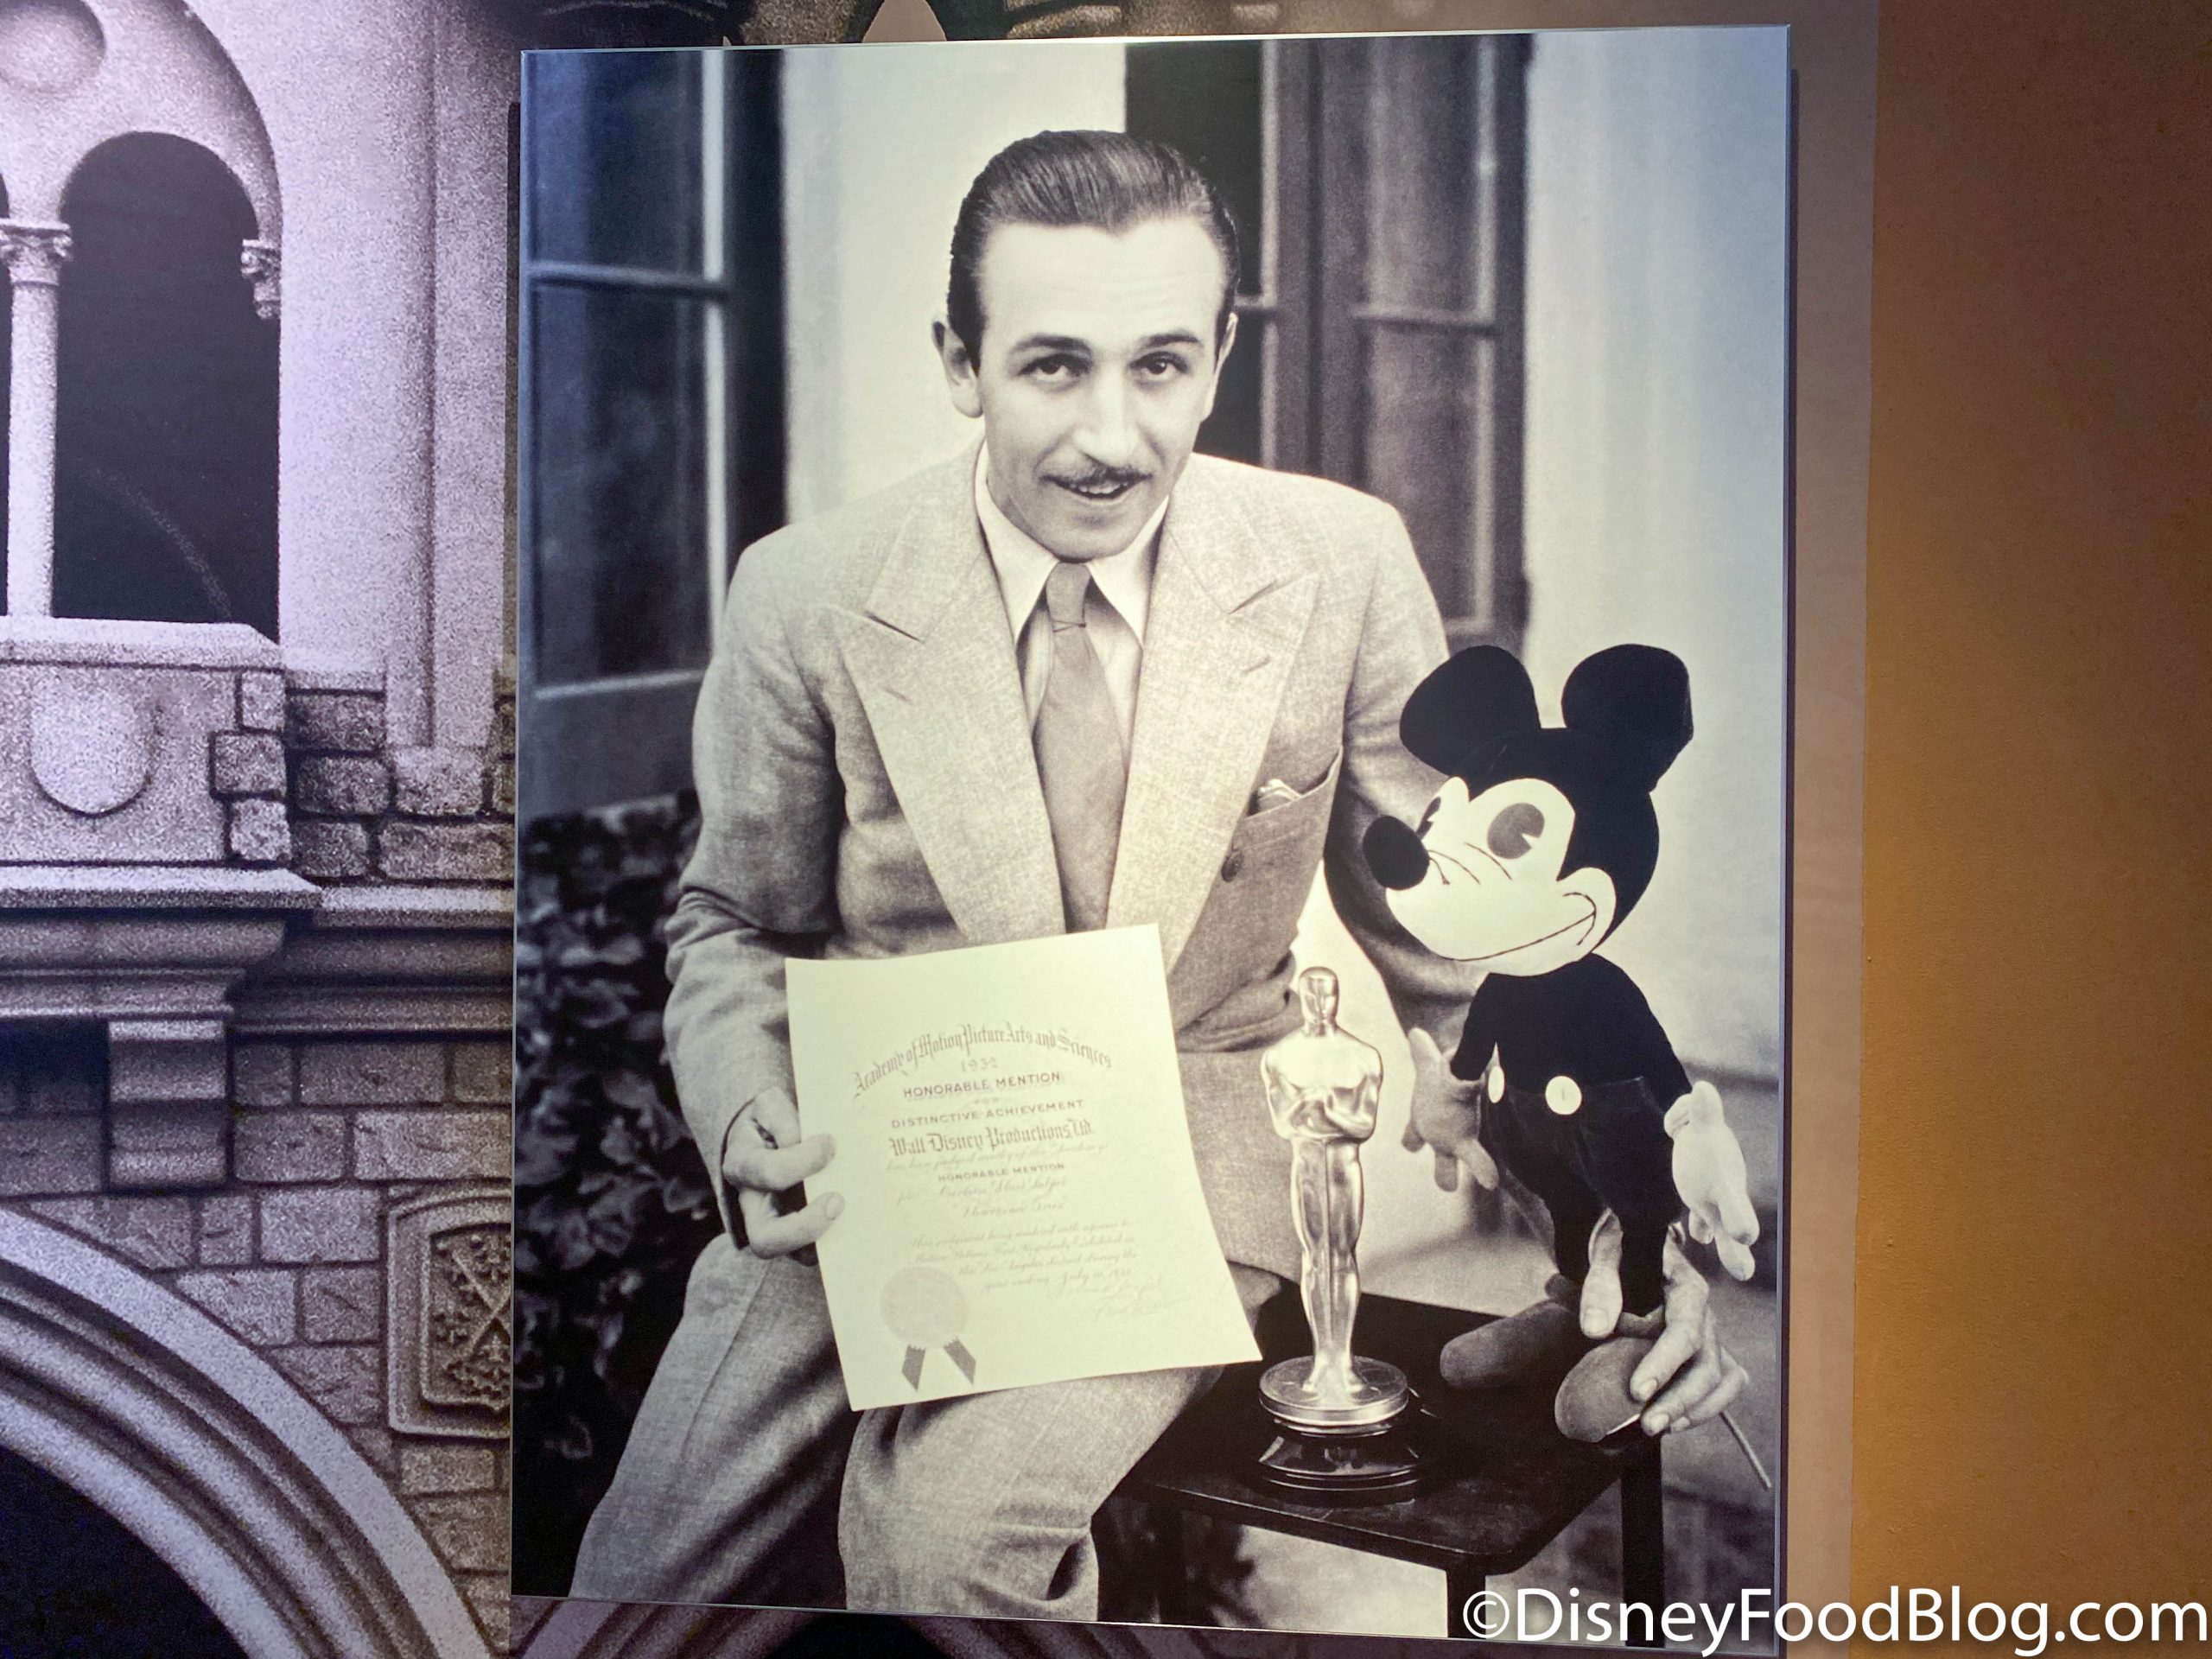 quotes from walt disney